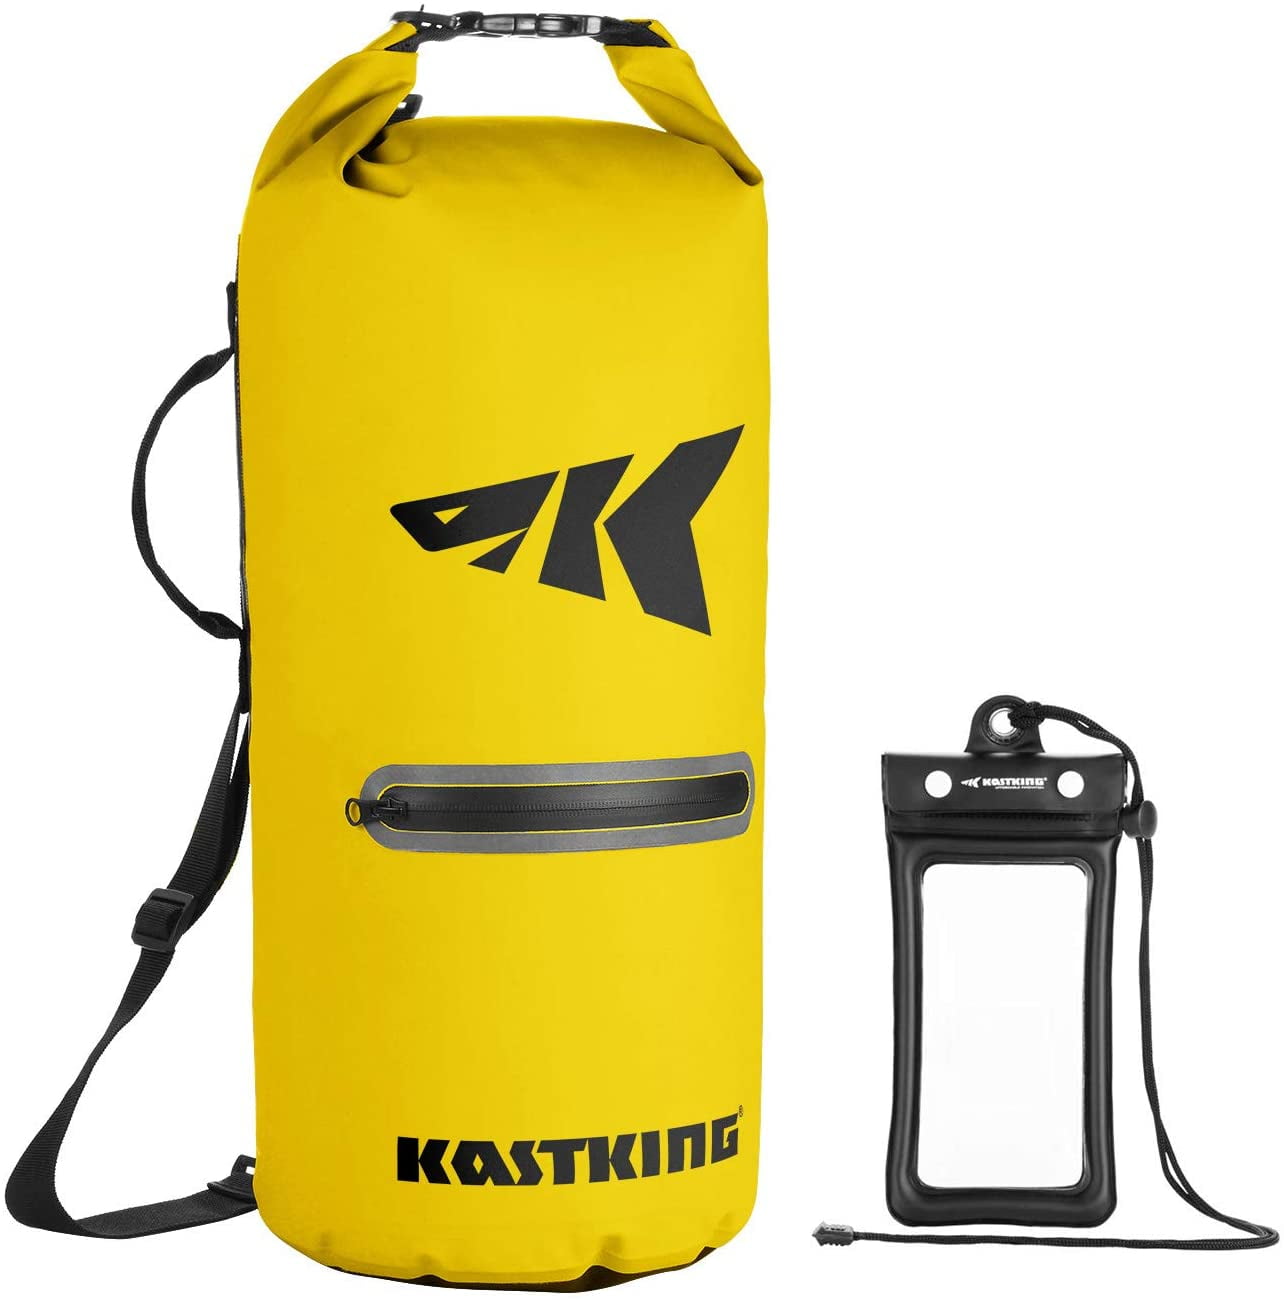 Kayaking Biking Hiking Camping KastKing Cyclone Seal Dry Bag Best-in-Class 100% Waterproof Bag with Front Zippered Pocket Skiing Perfect for Beach Boating Fishing 